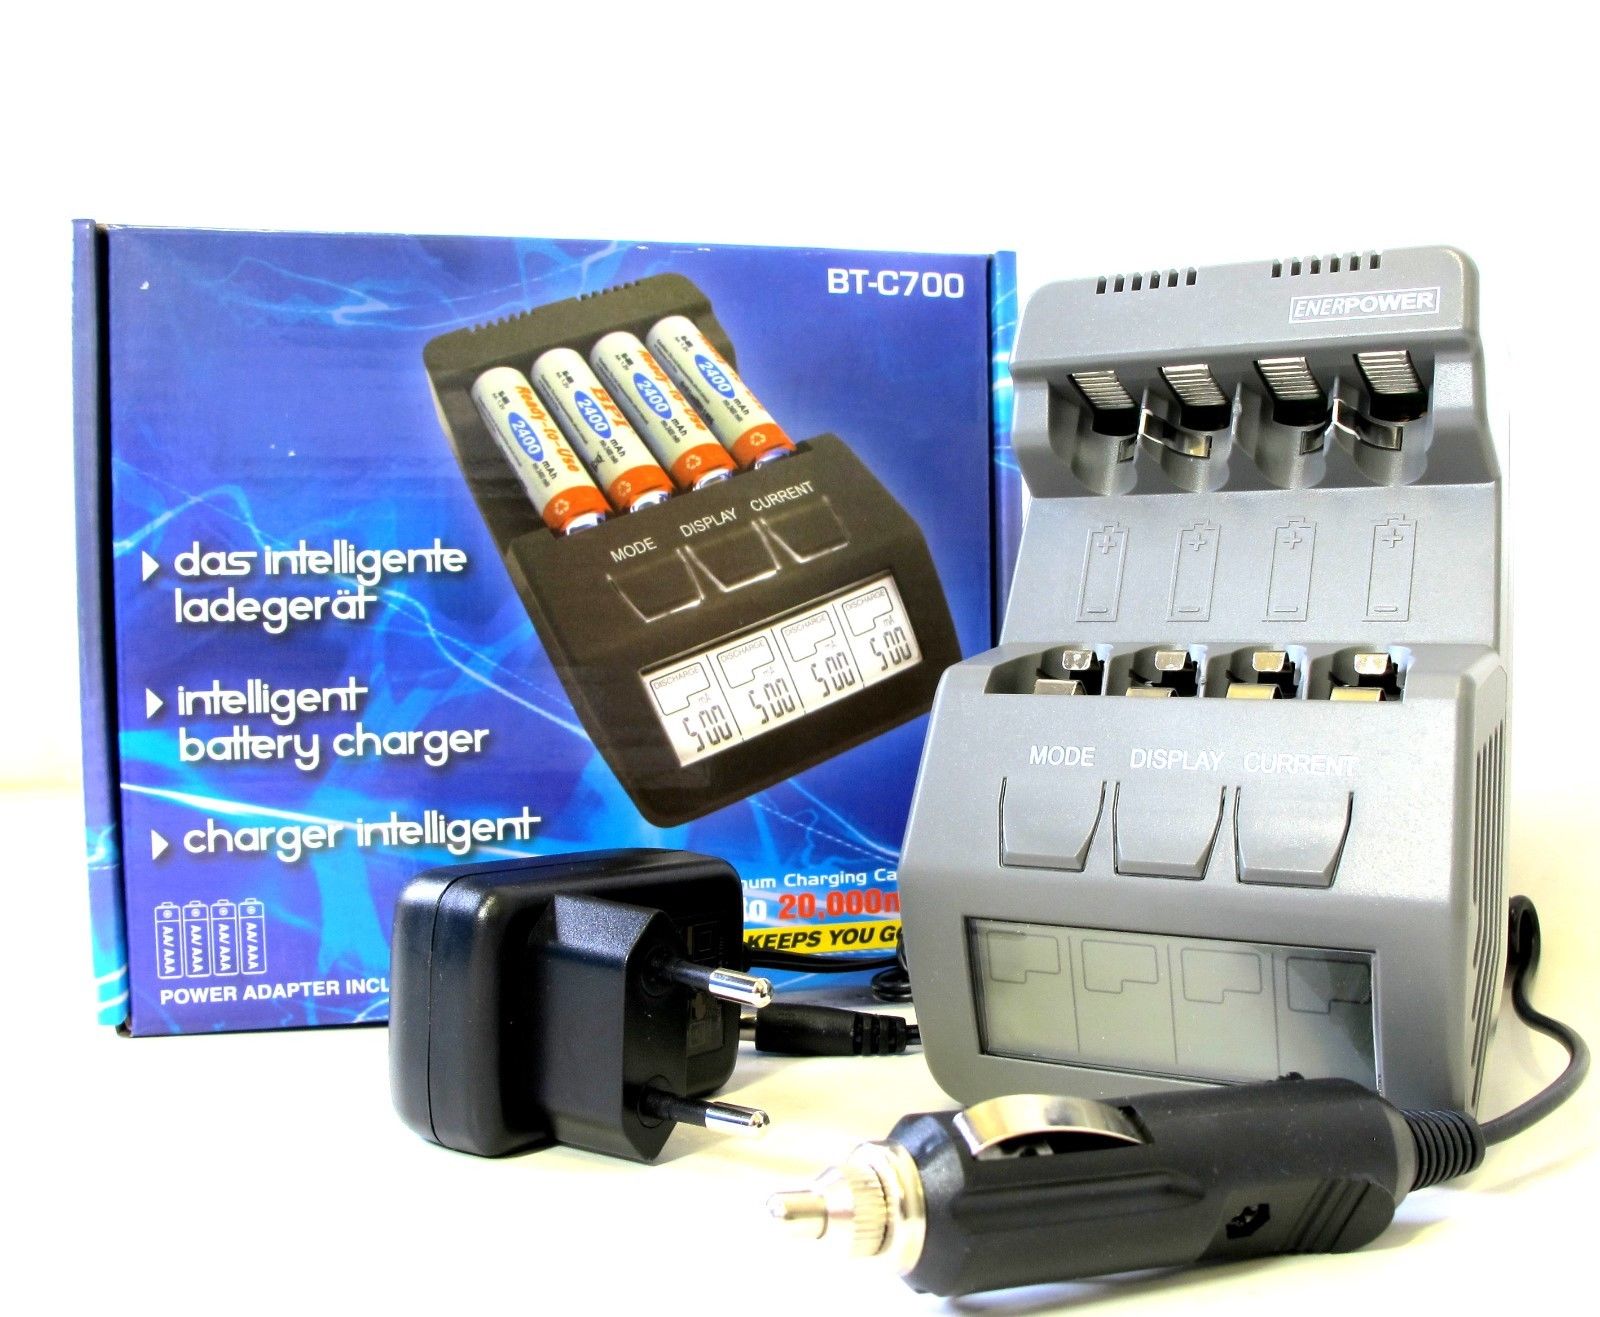 ENERpower BT-C700 Intelligent Charger for 4 AA/AAA NIMH/NiCd Rechargeable Batteries 1.2V